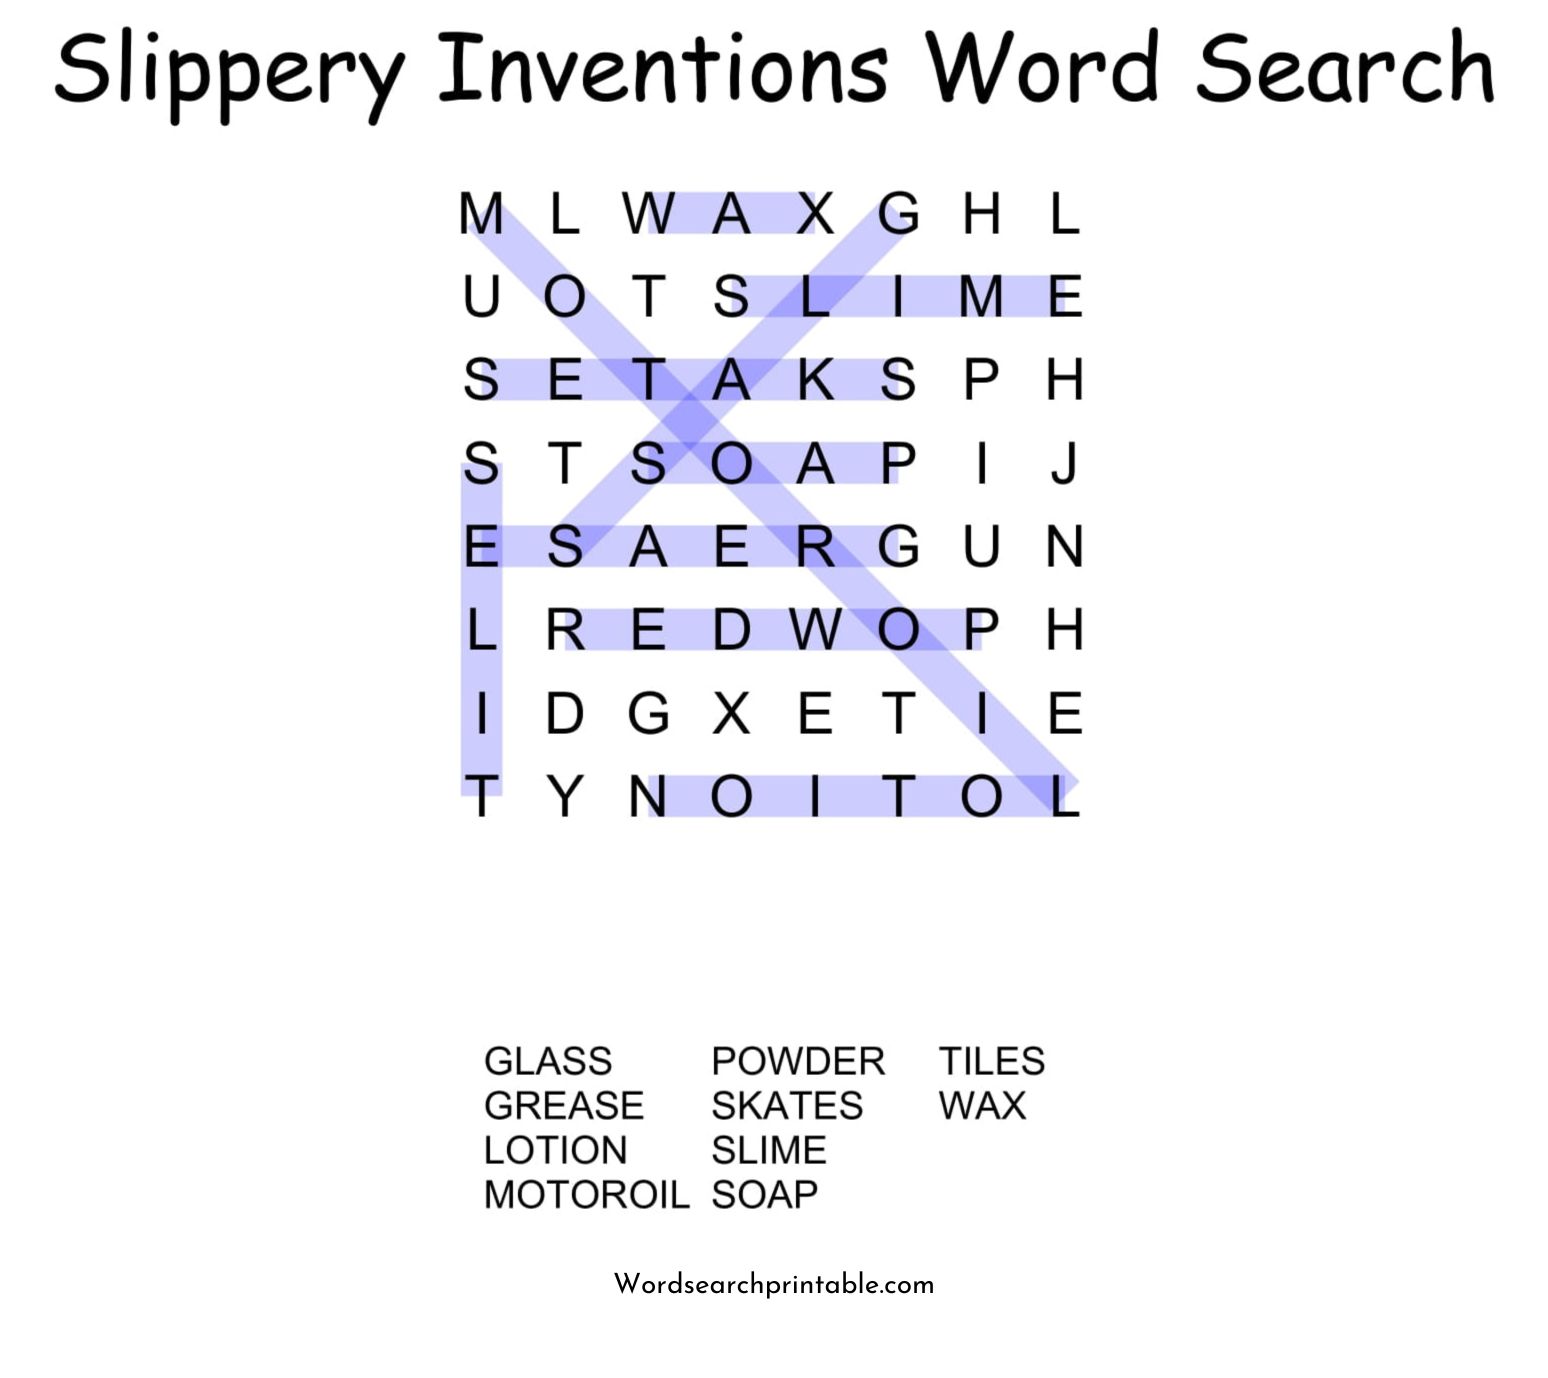 slippery inventions word search puzzle solution